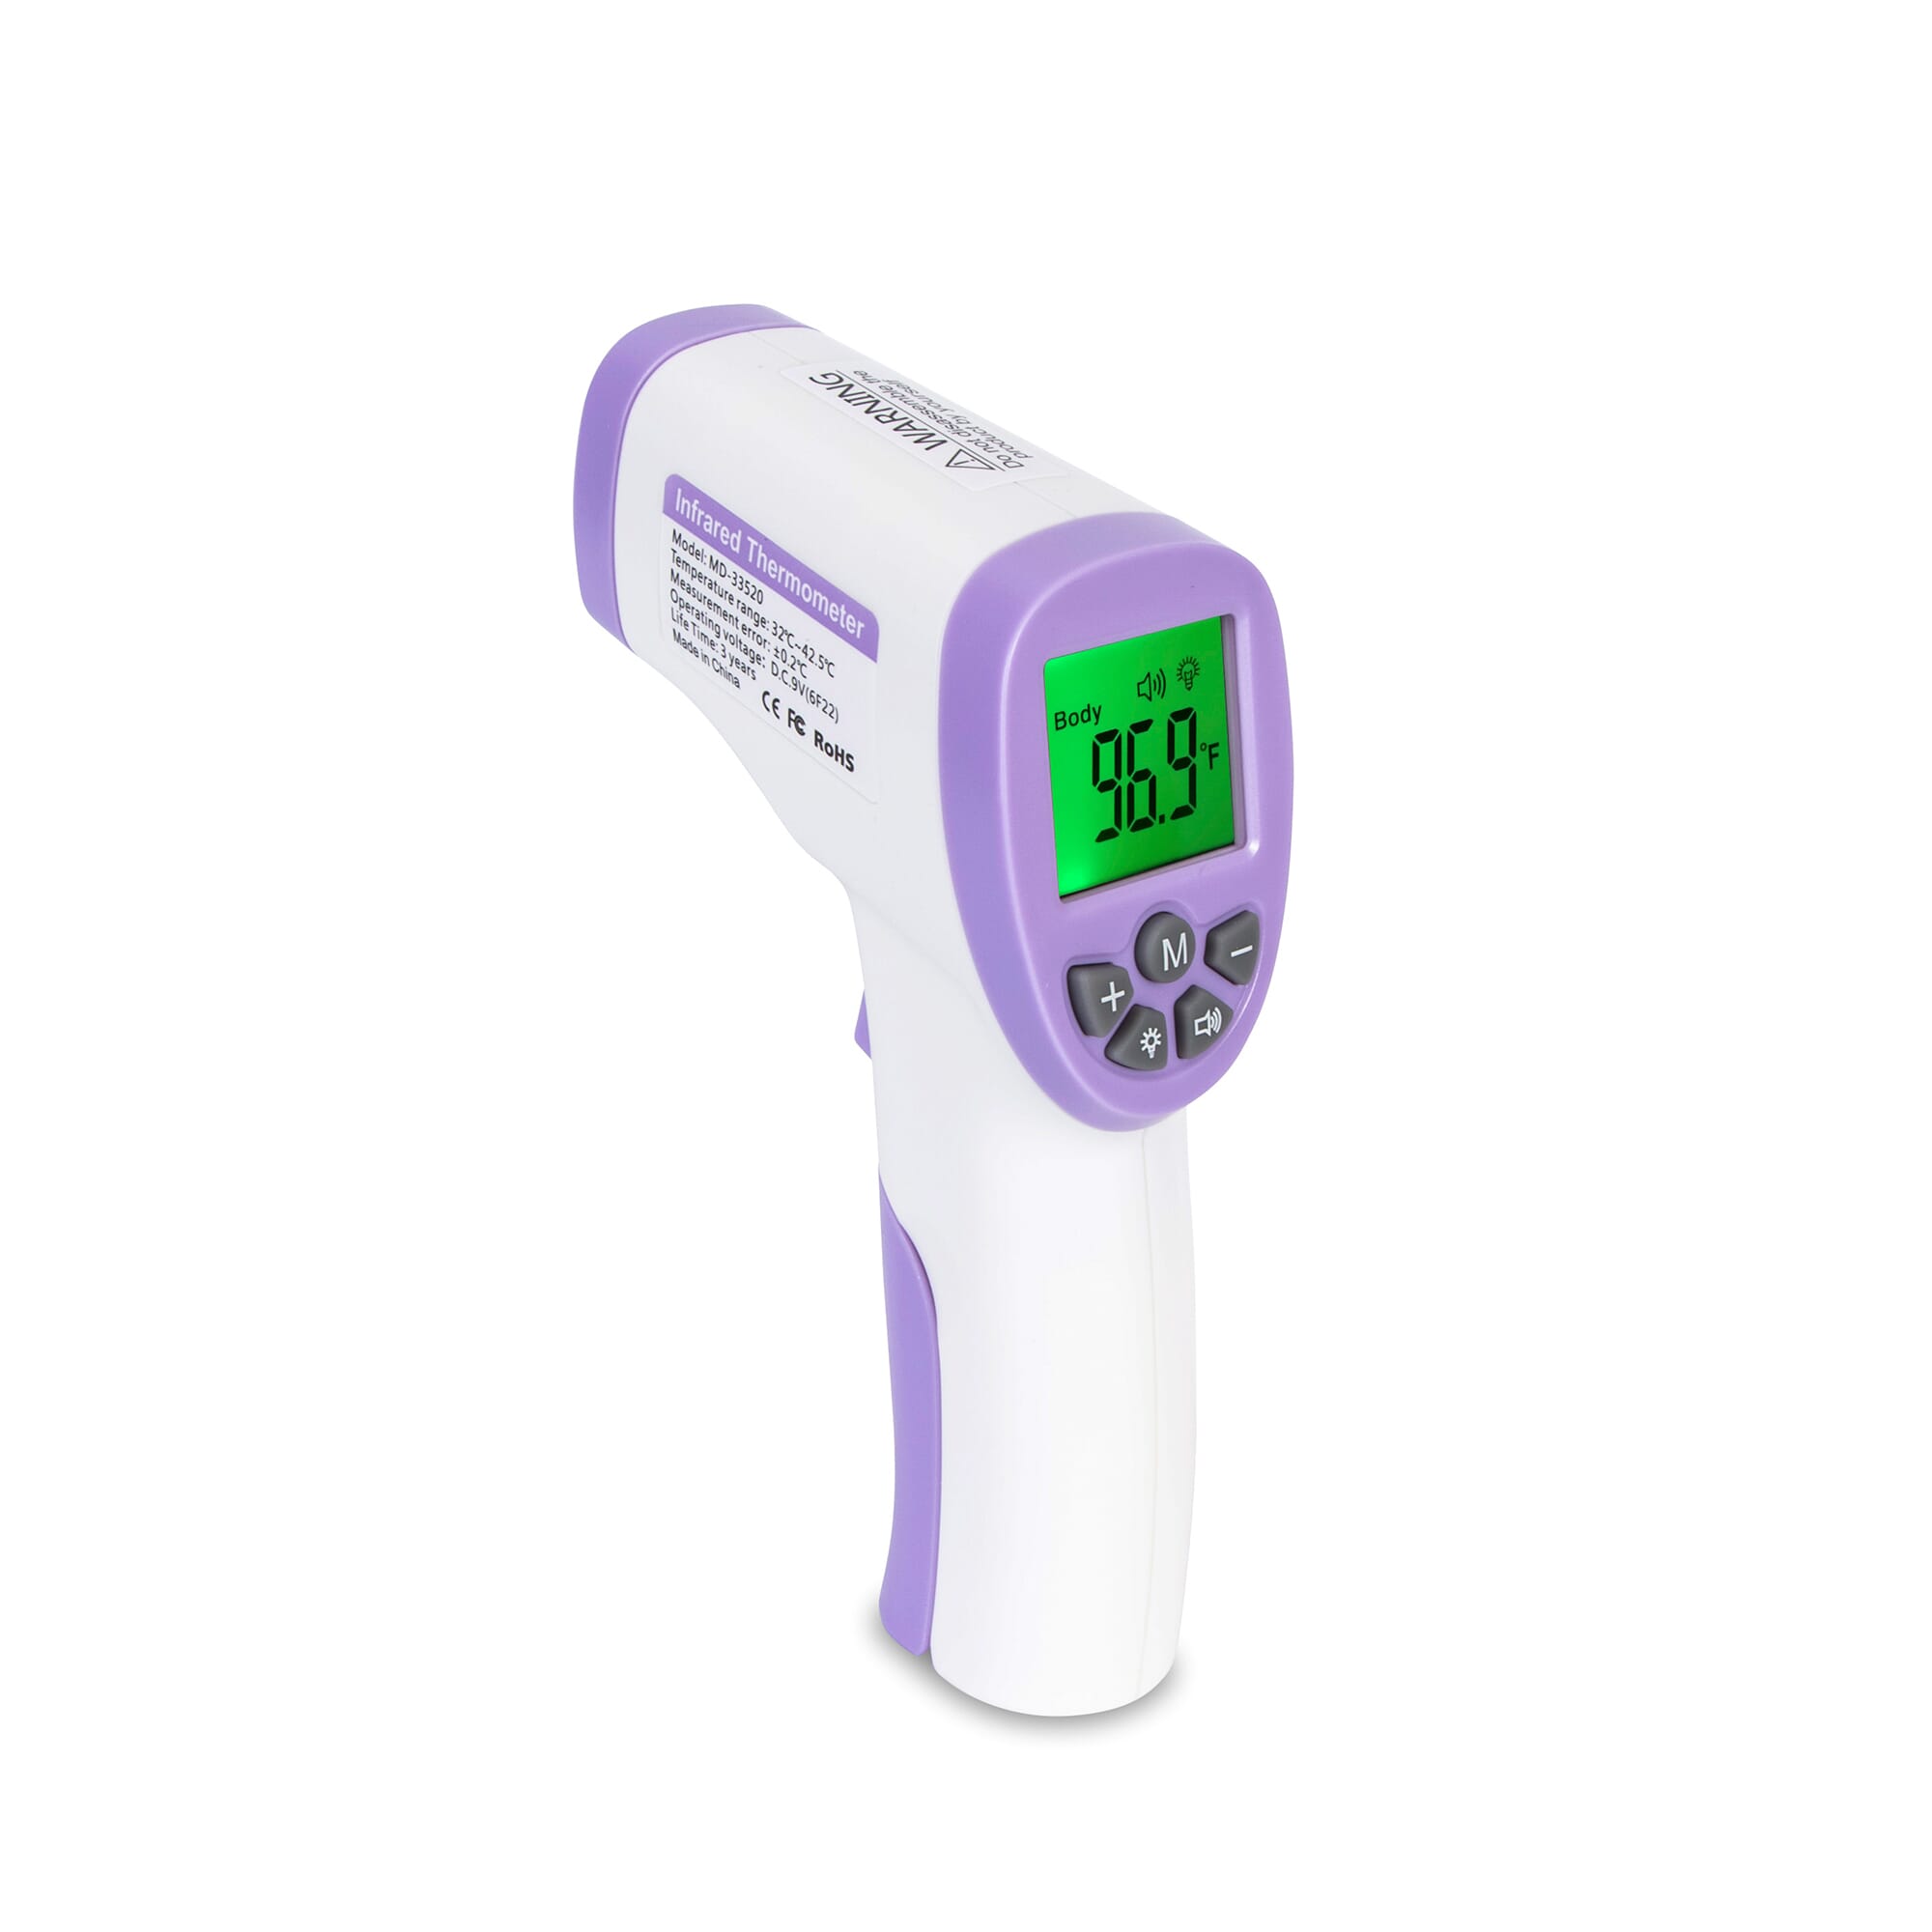 No contact thermometer